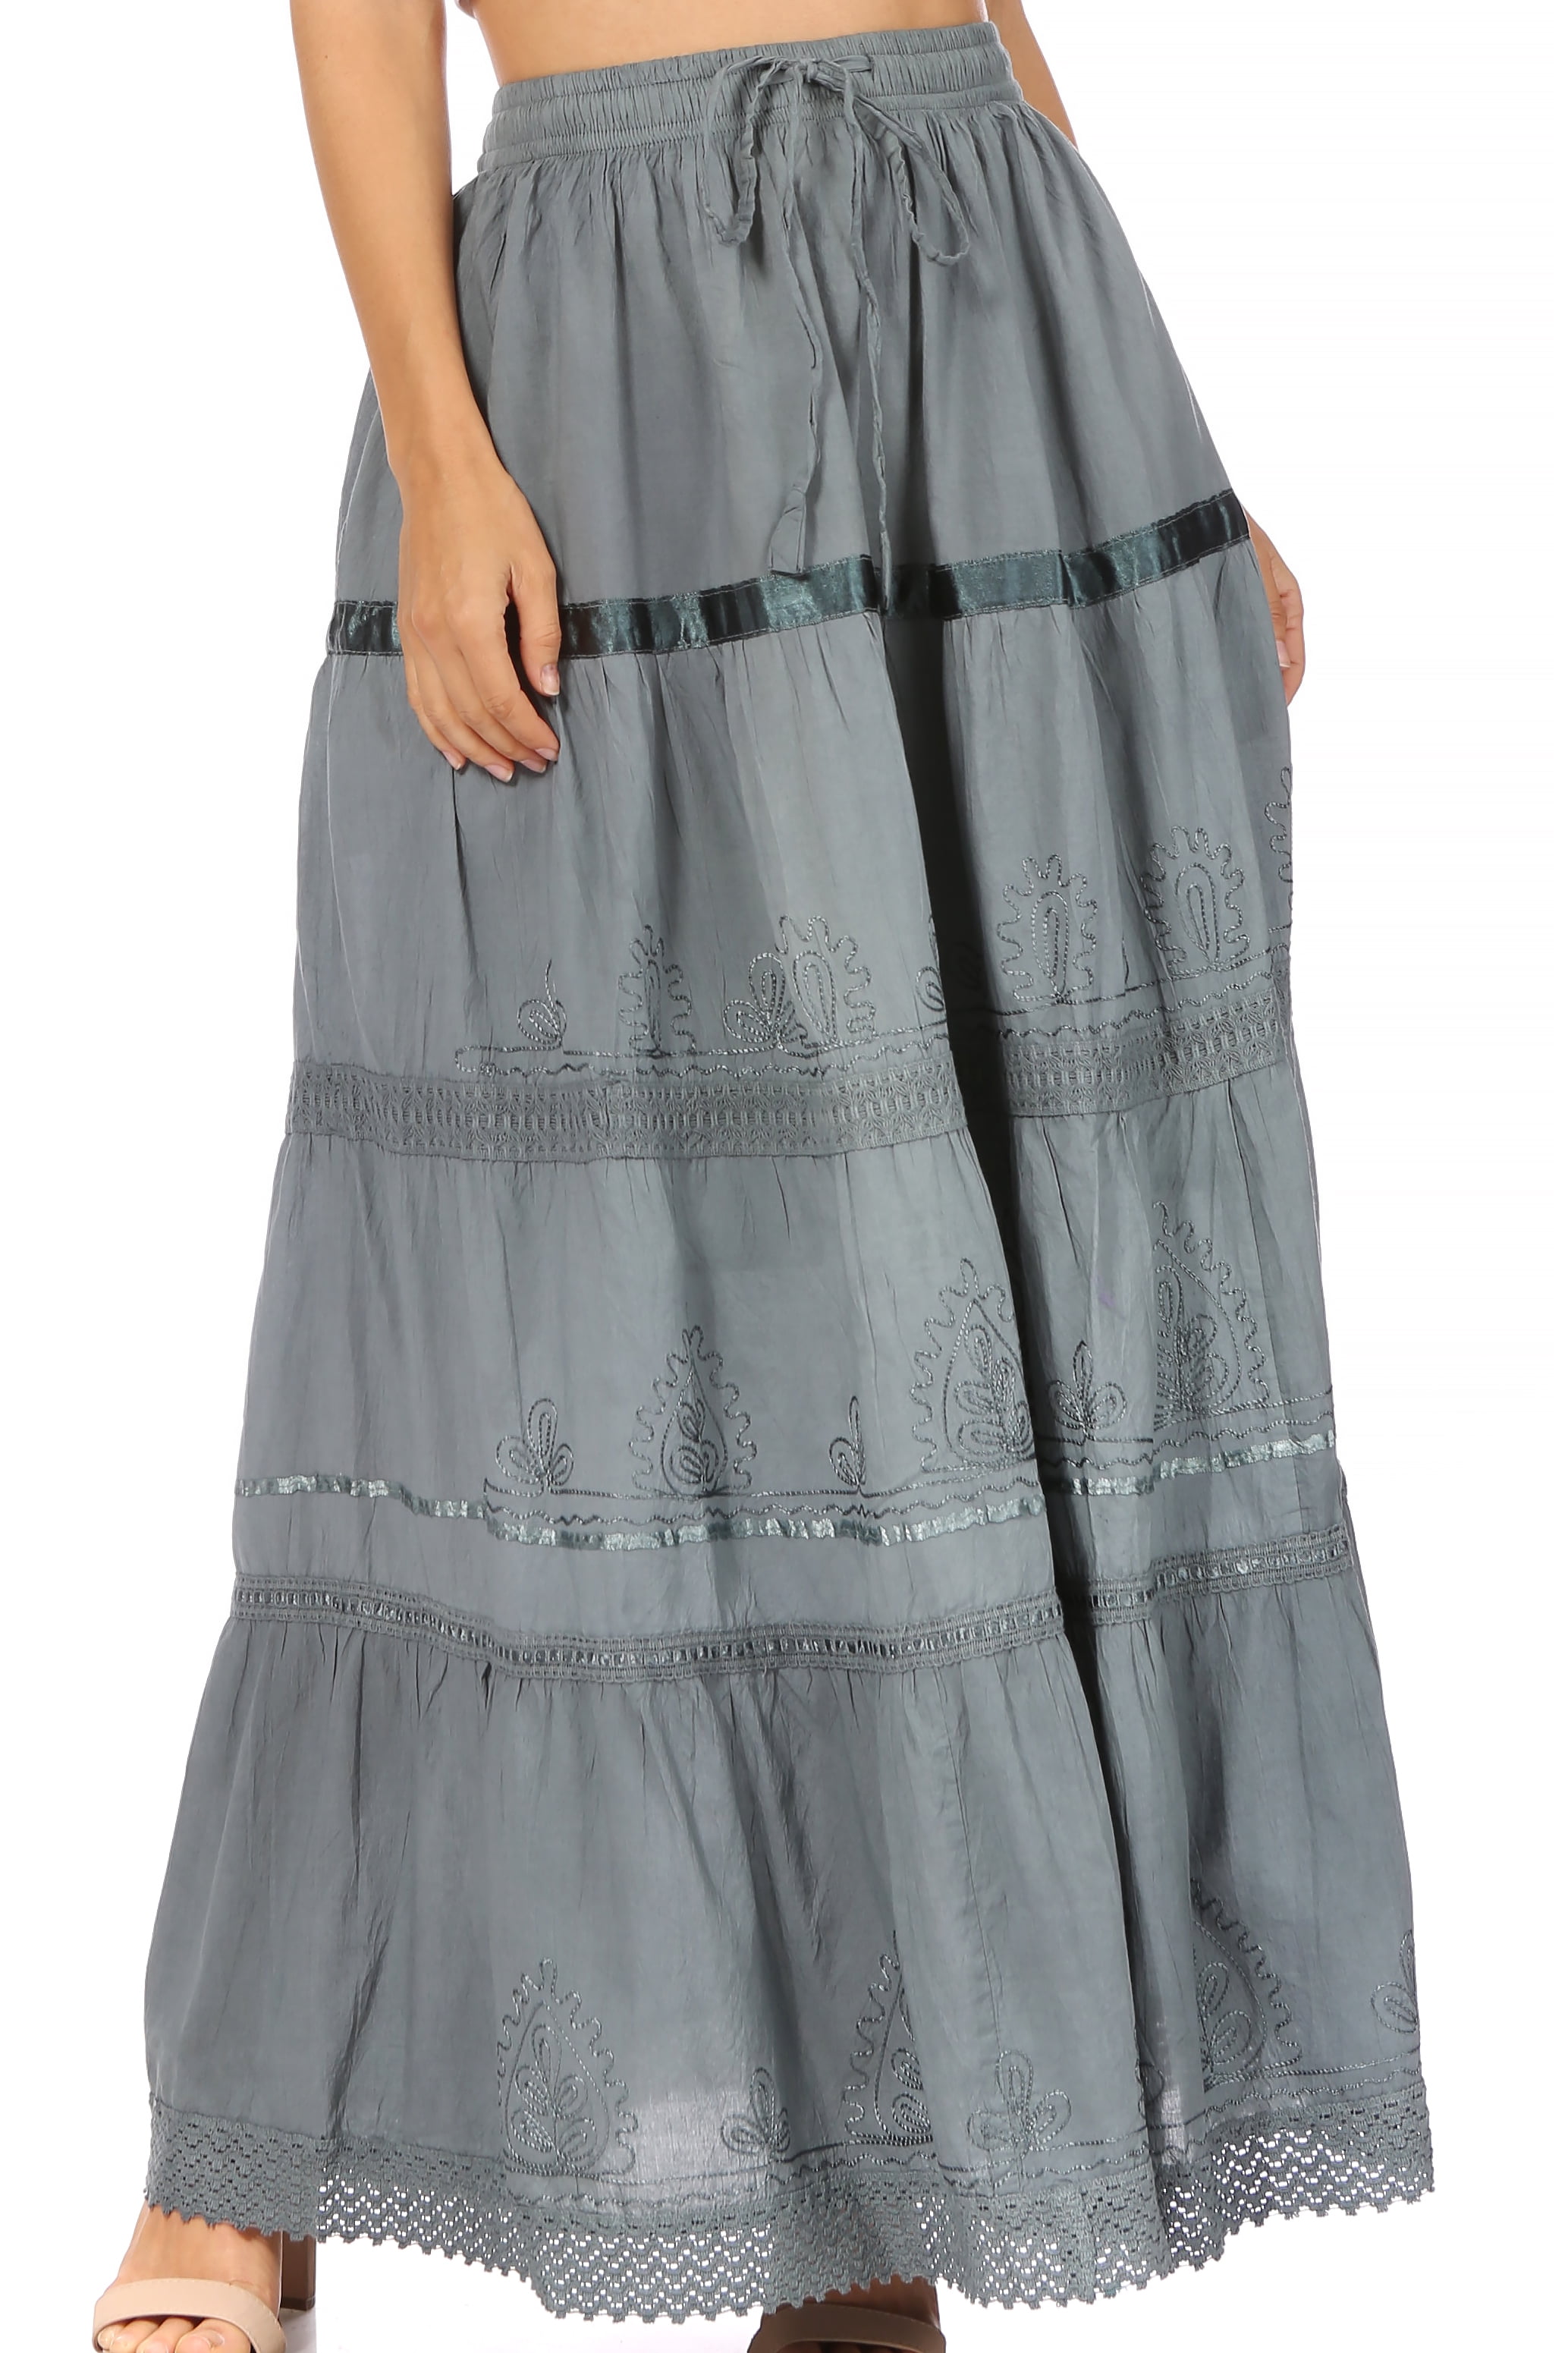 Sakkas Solid Embroidered Gypsy / Bohemian Full / Maxi / Long Cotton Skirt -  Grey - One Size - Walmart.com